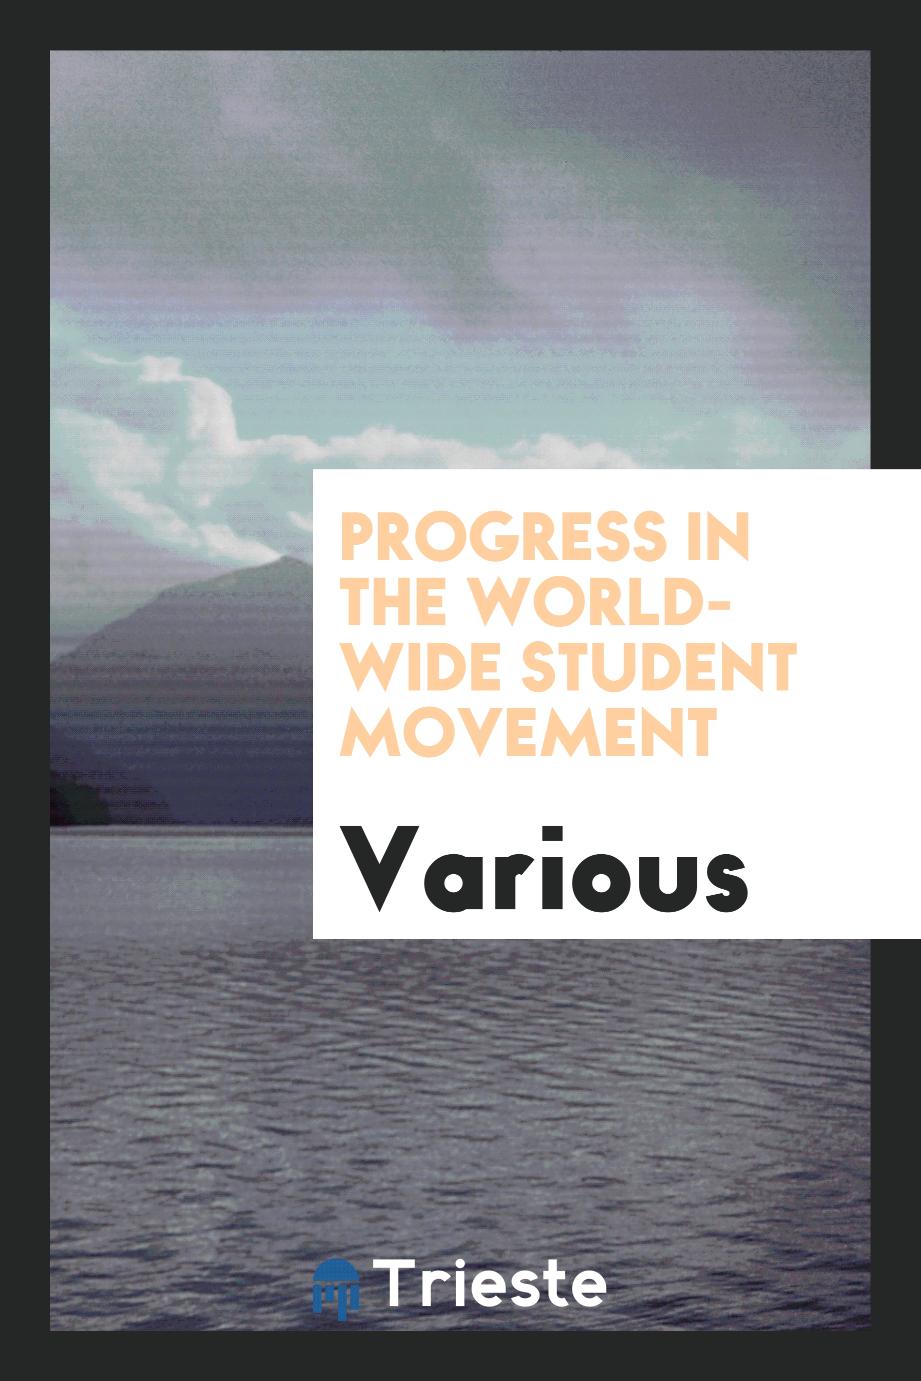 Progress in the World-wide student movement